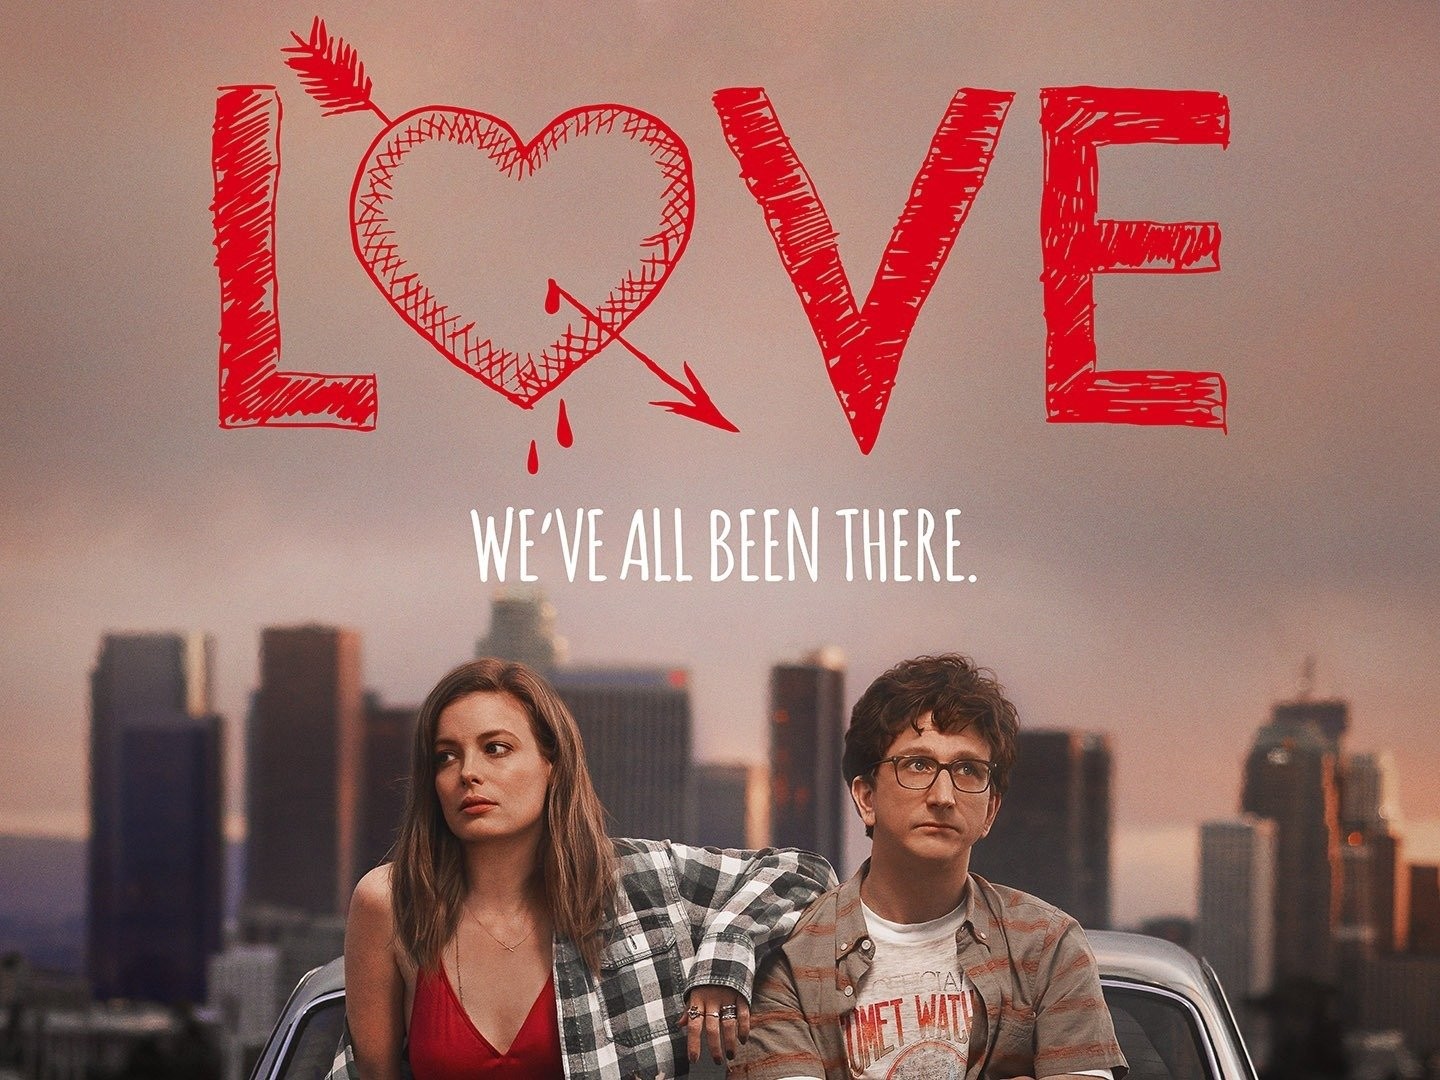 Super Sad True Love Story HBO Max Series: What We Know (Release Date, Cast,  Movie Trailer) - The Bibliofile